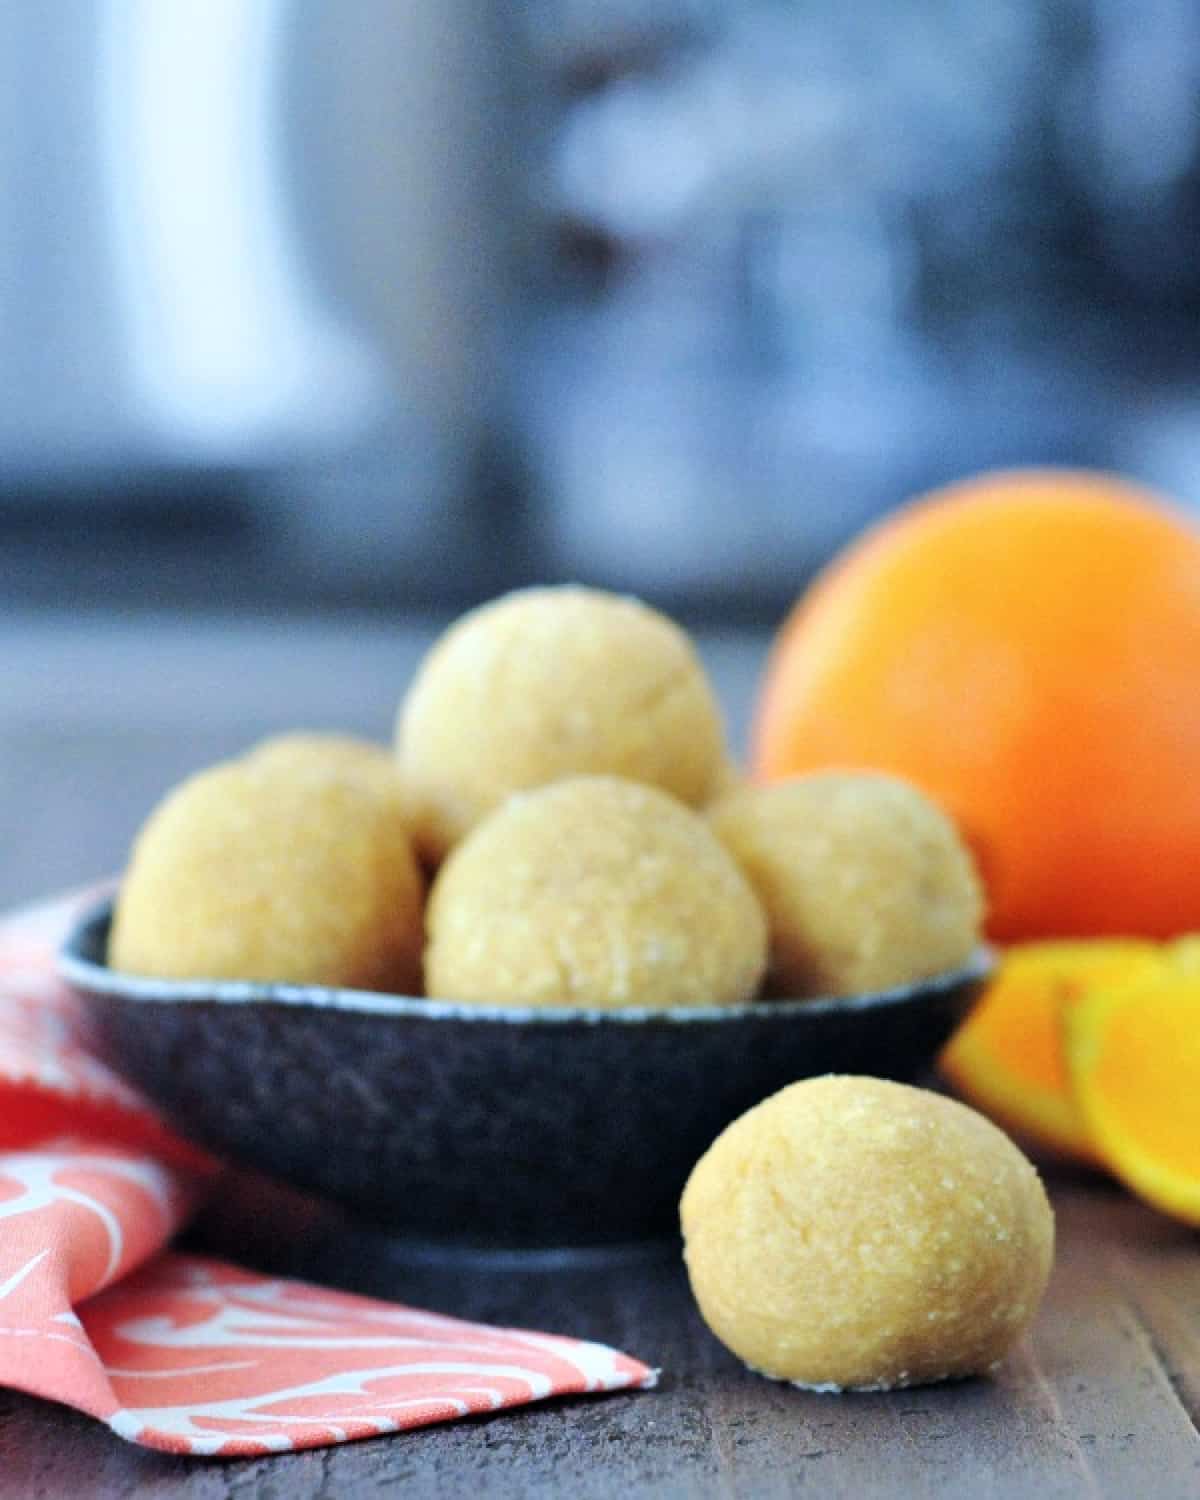 Small round orange creamsicle protein bites stacked in a rustic dark grey bowl, one bite sitting outside the bowl on a wood surface. Whole unpeeled orange and several fresh orange slices blurred in background.